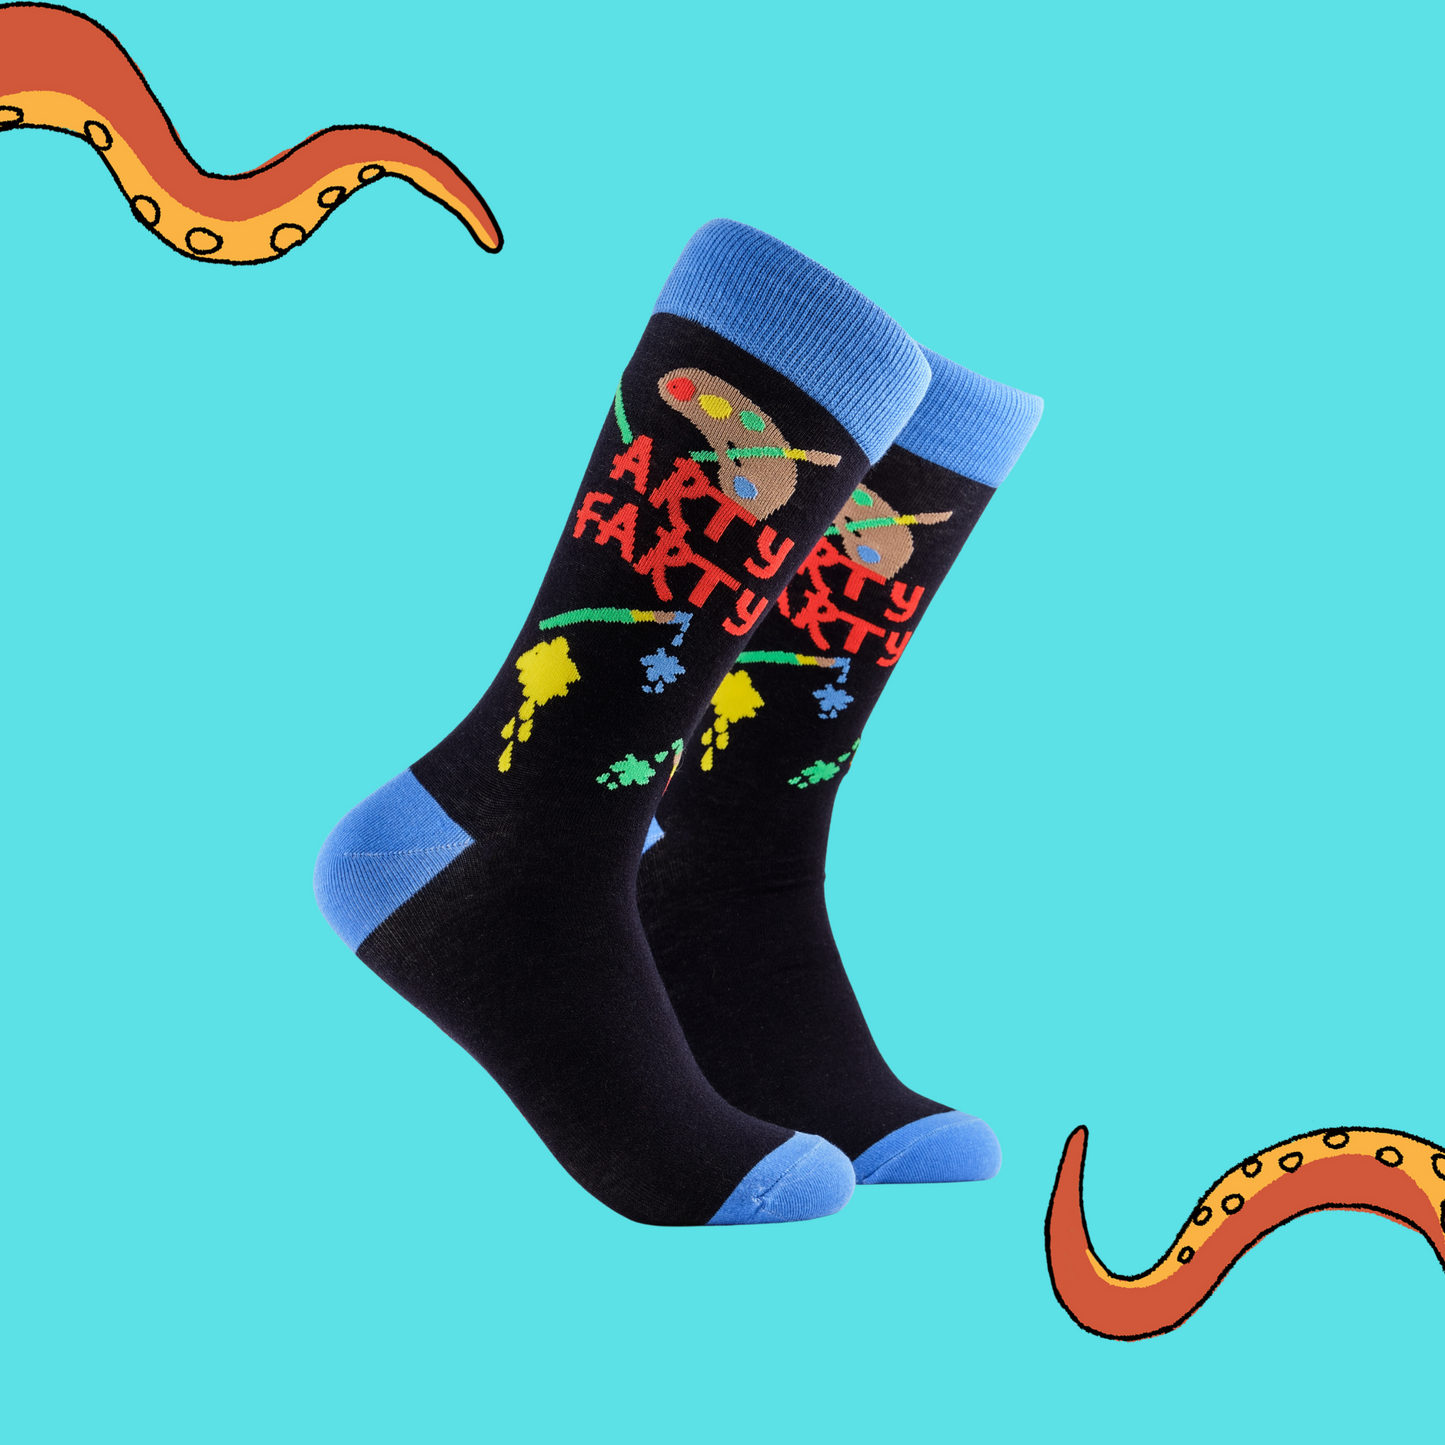 Art Socks - Arty Farty. A pair of socks depicting an artist pallet and paint splashes. Dark blue legs, light blue cuff, heel and toe.